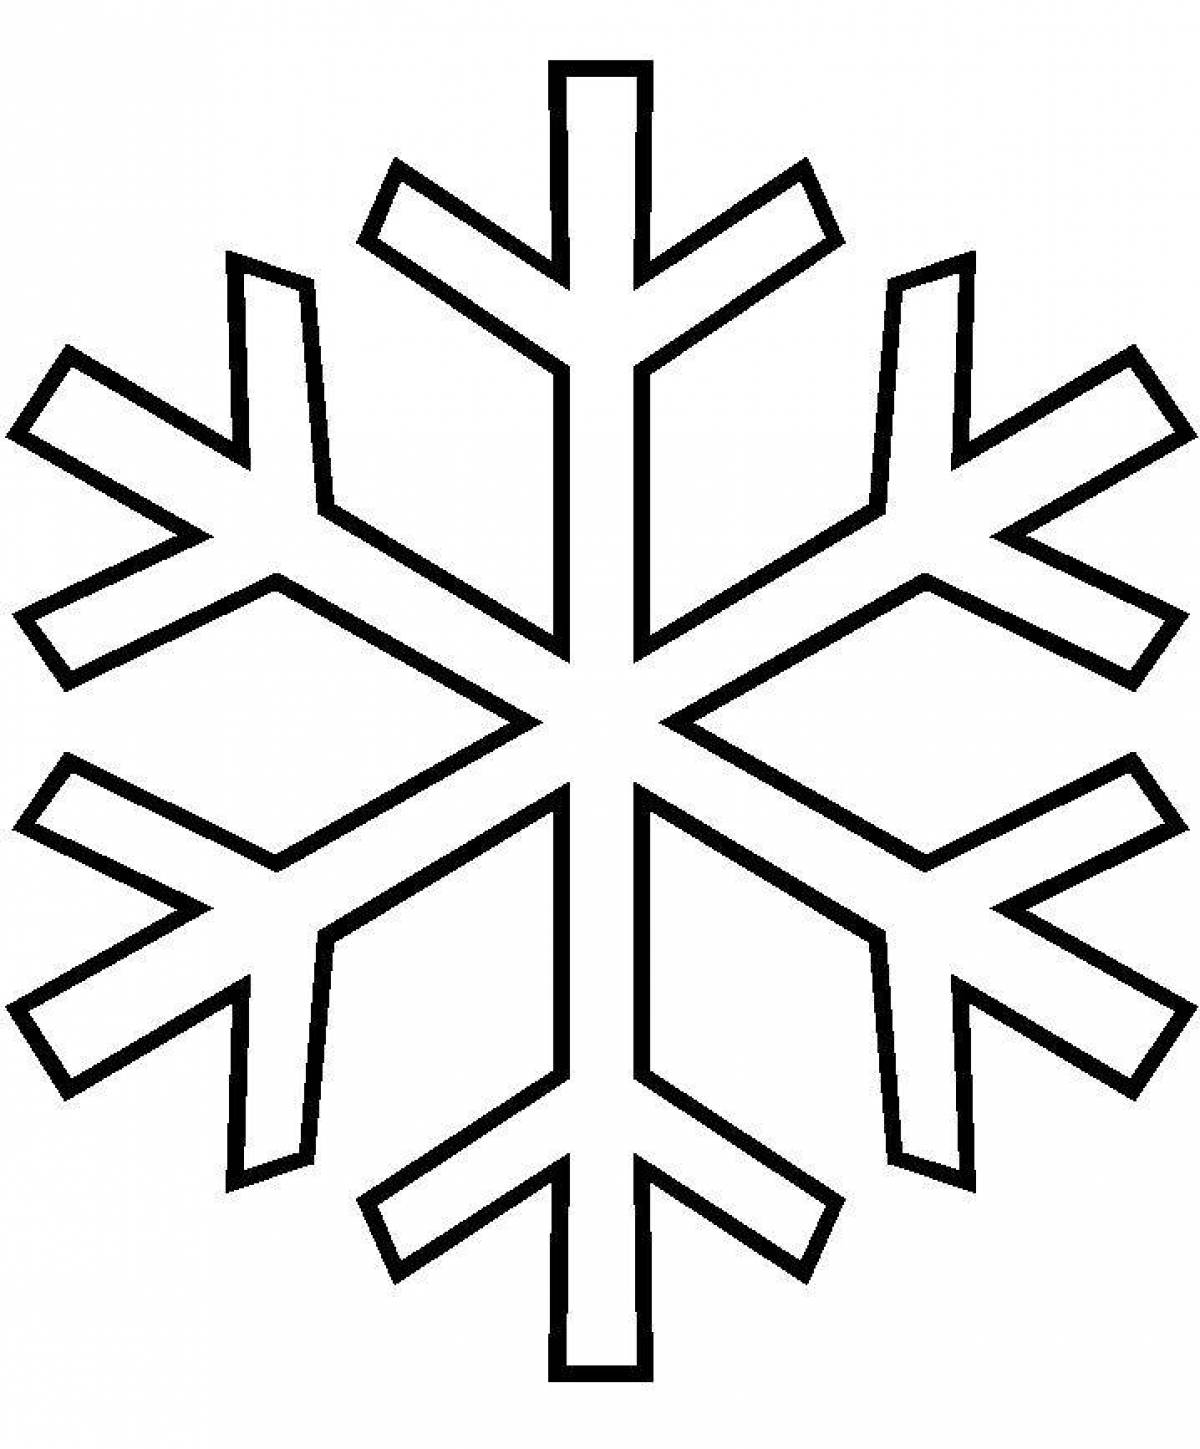 Exquisite snowflake coloring book for kids